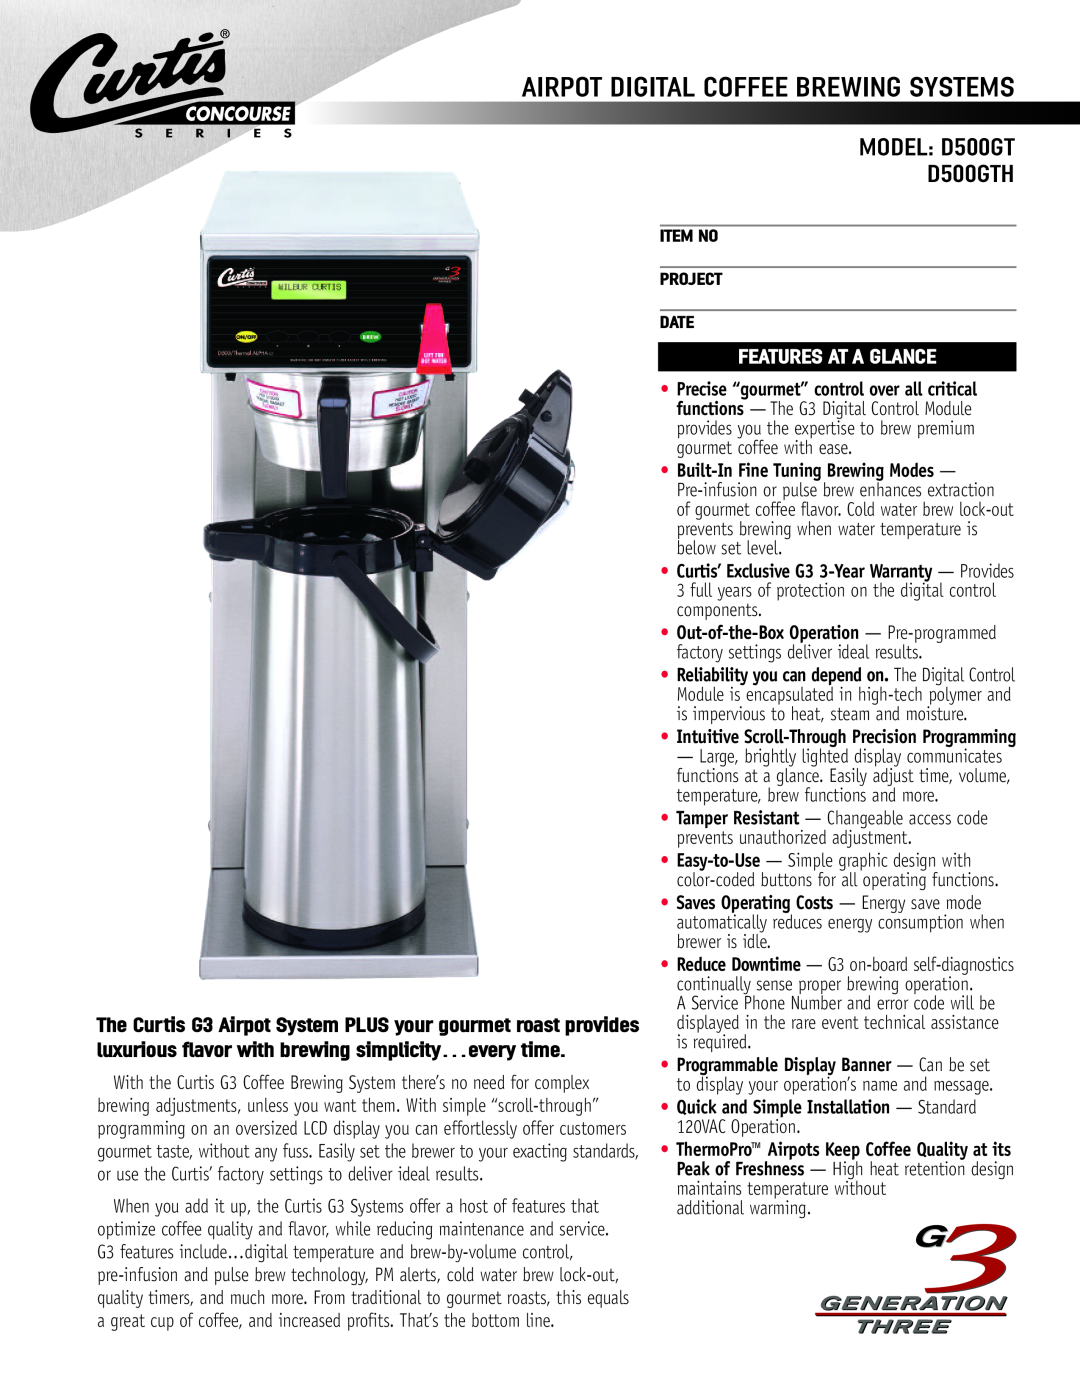 Wibur Curtis Company warranty MODEL D500GT D500GTH, Airpot Digital Coffee Brewing Systems, Features At A Glance 